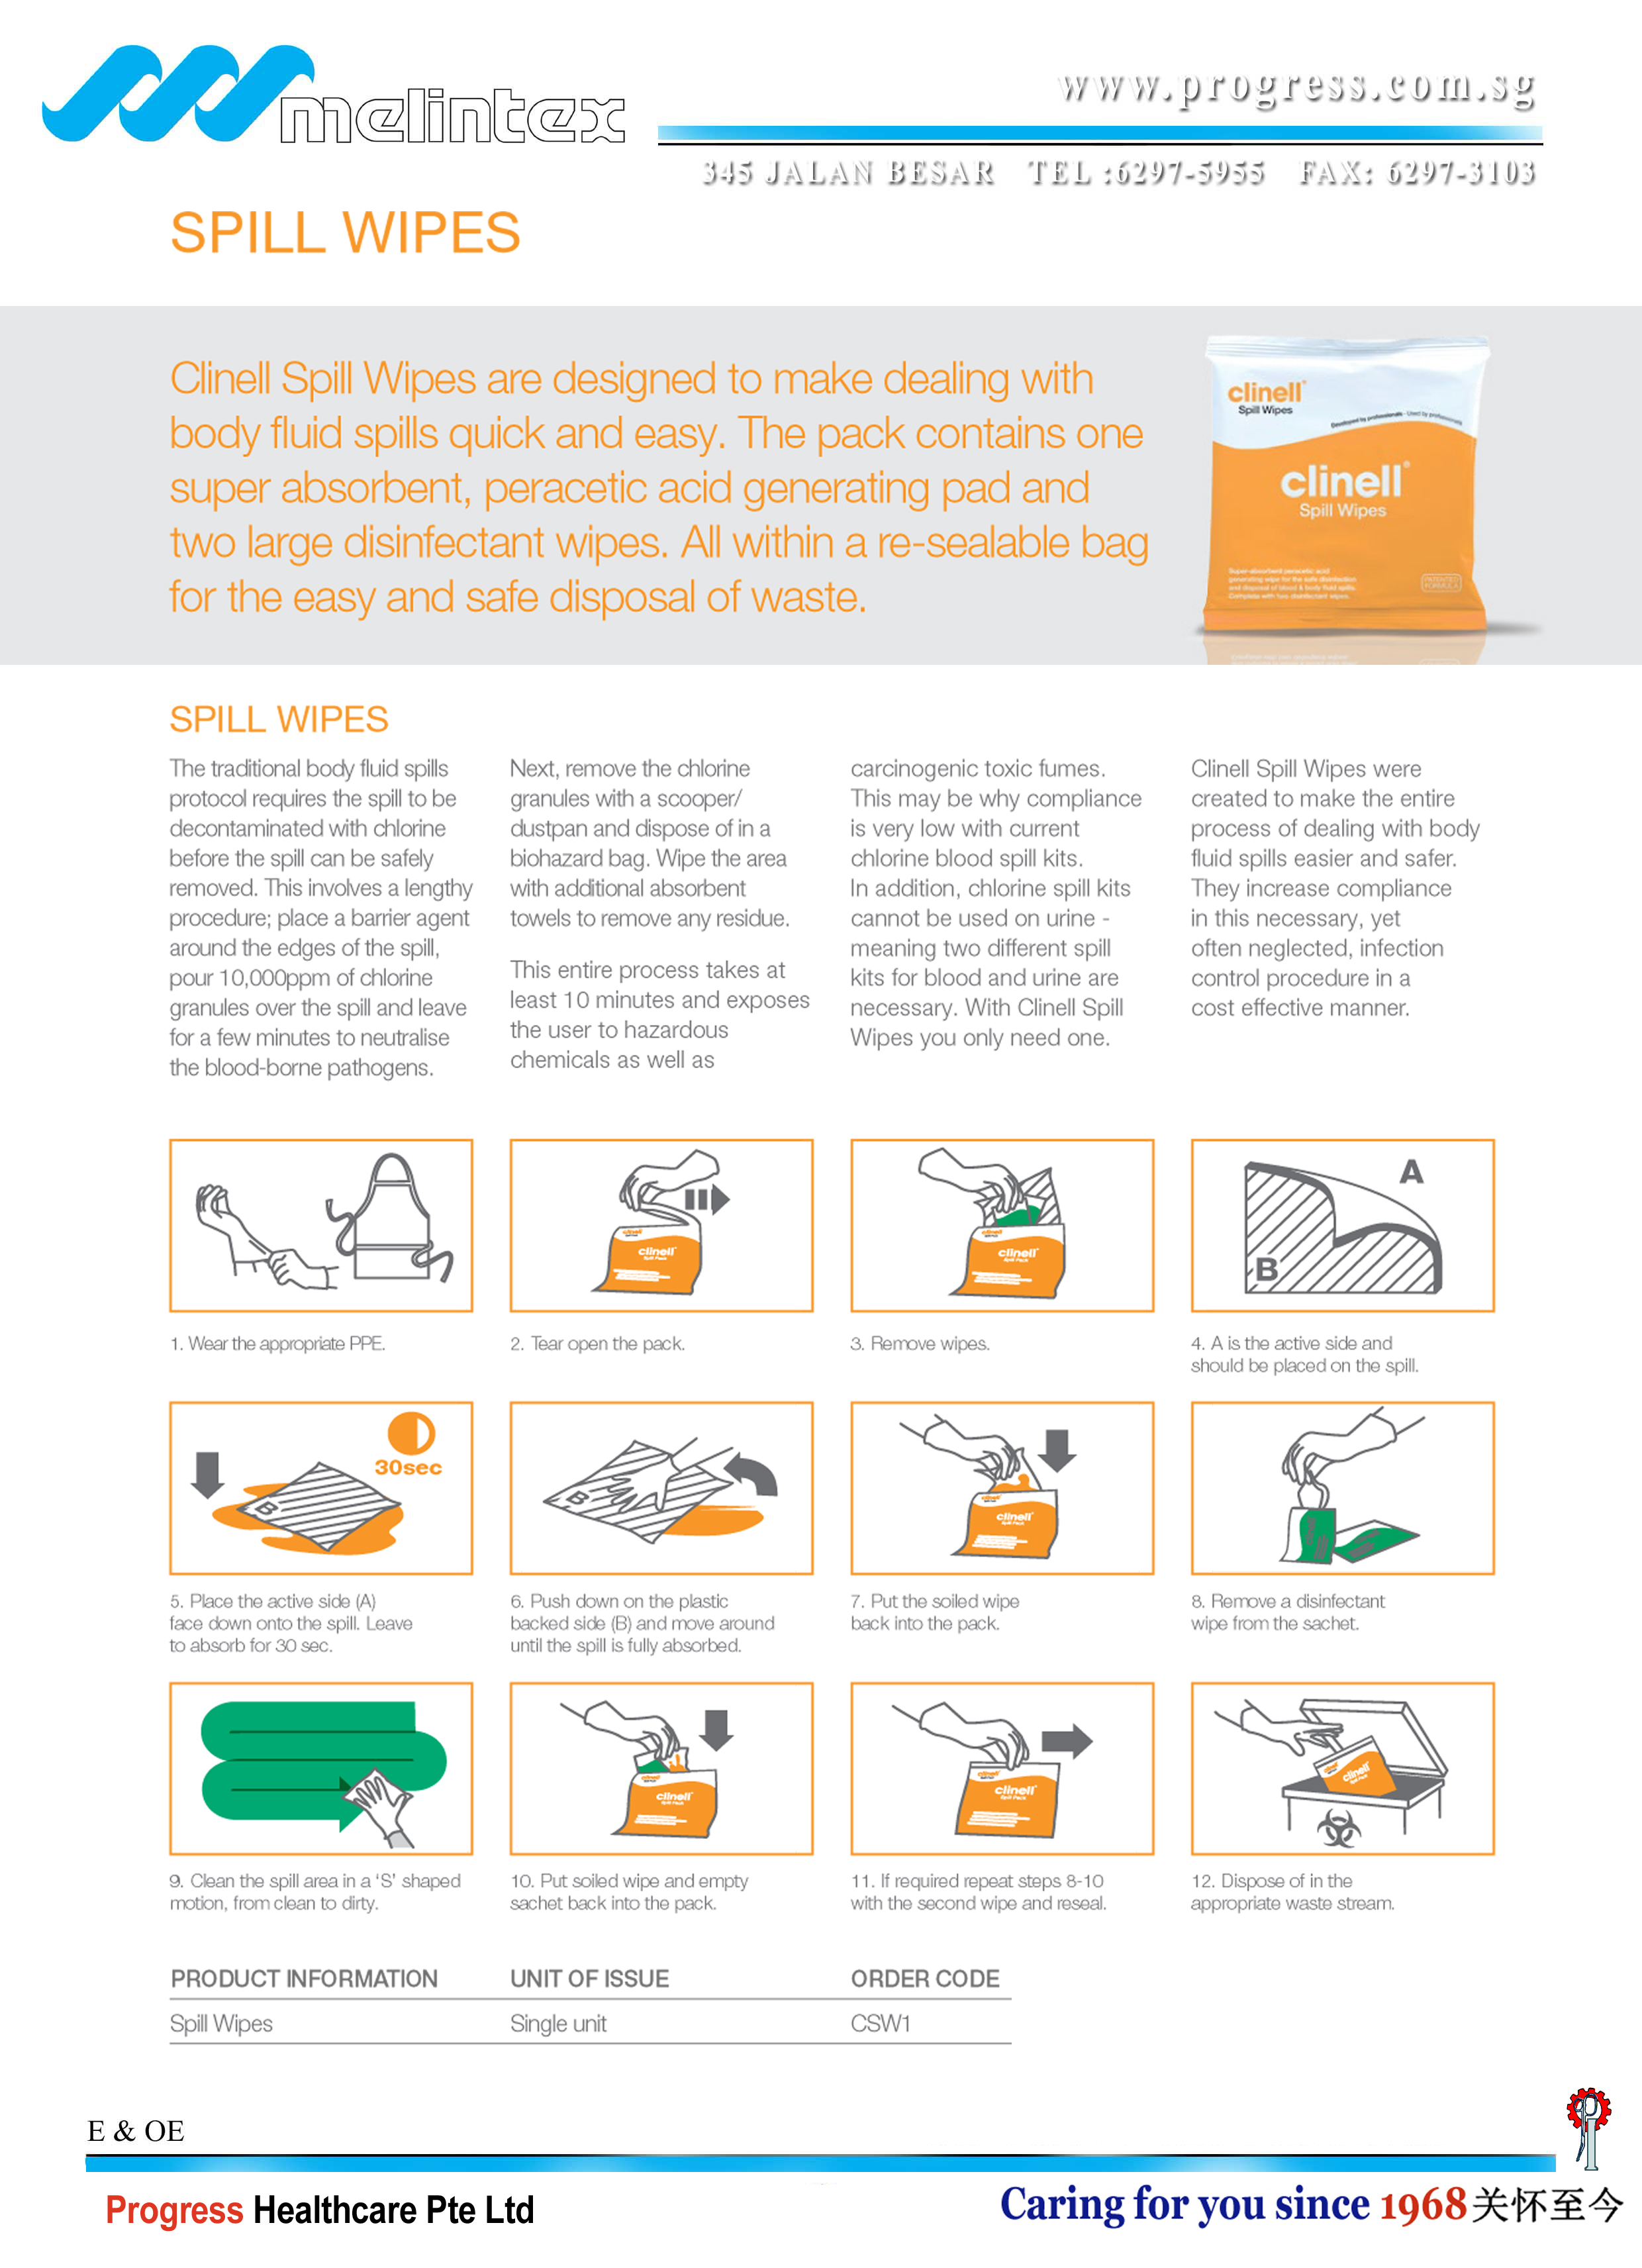 Cat CSW1 CLINELL Spill-wipes (1)